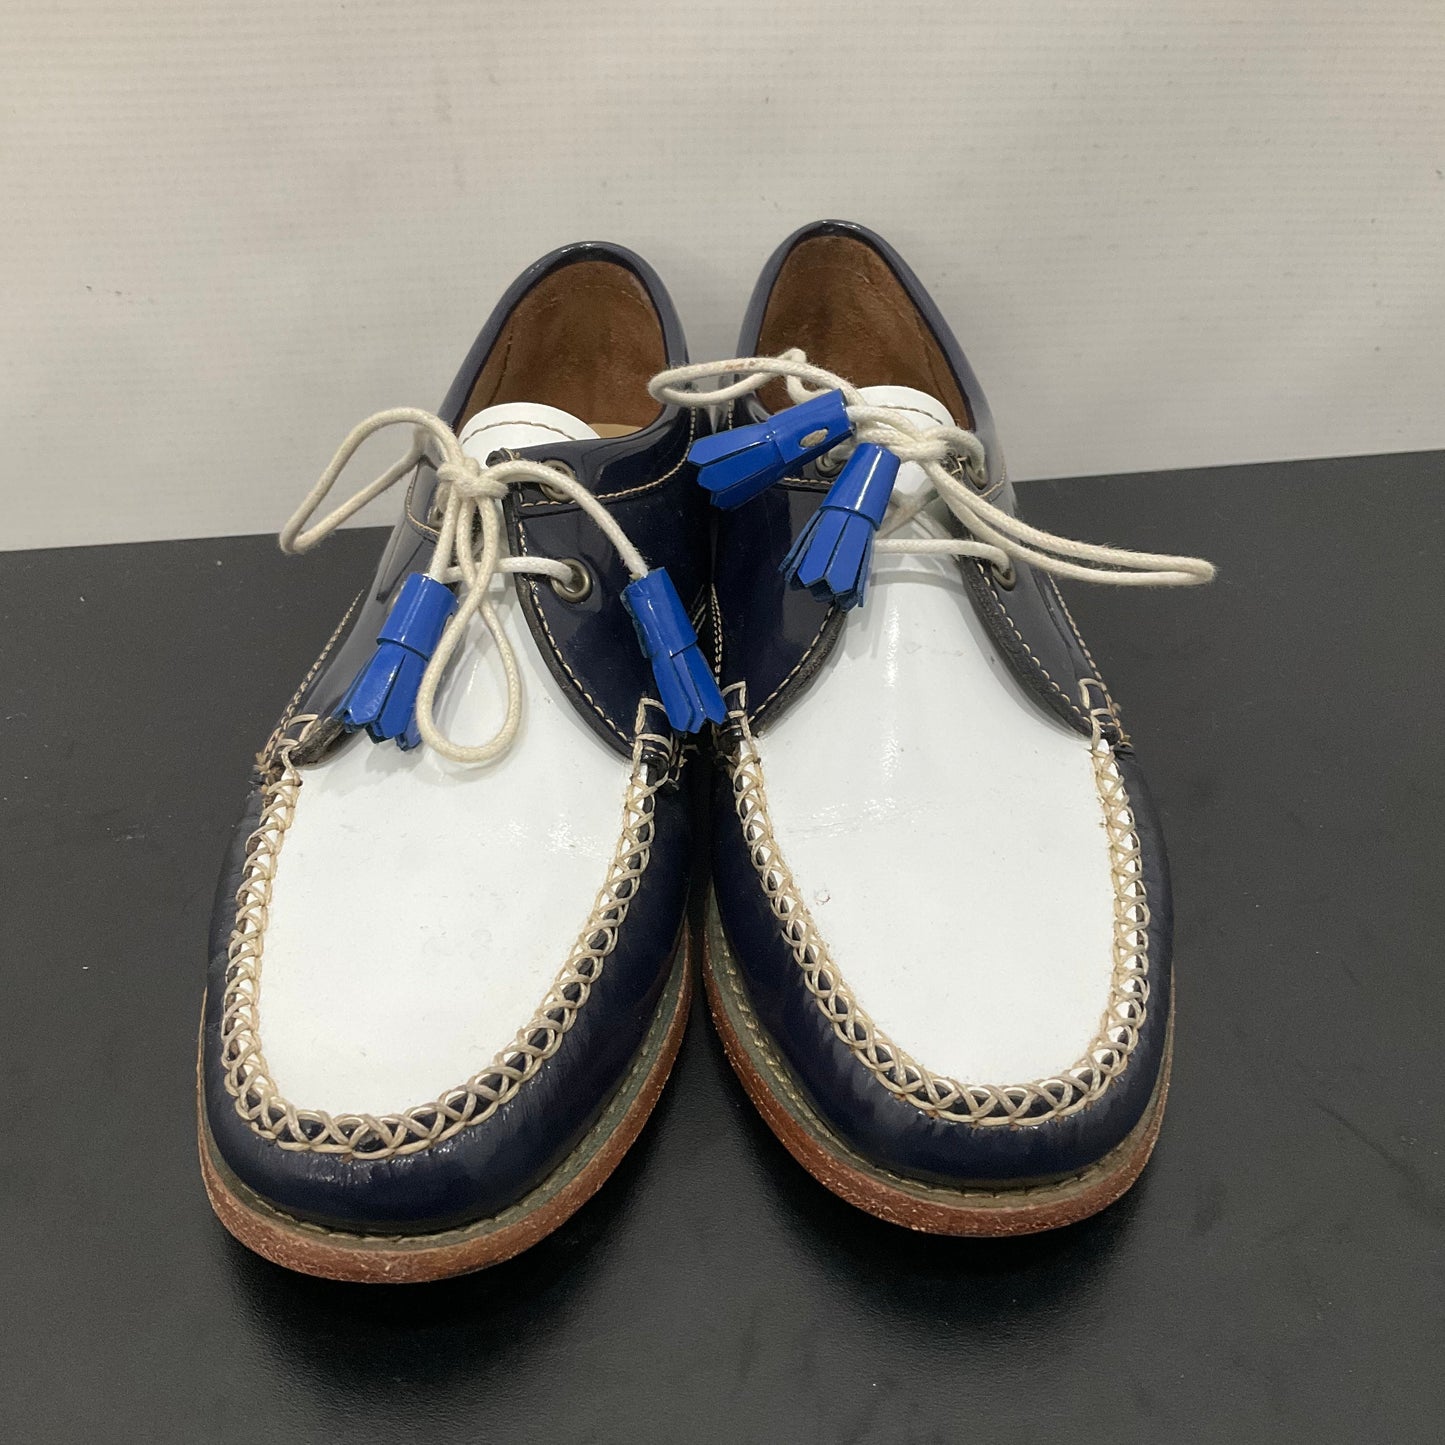 Blue & White Shoes Flats weejuns, Size 7.5